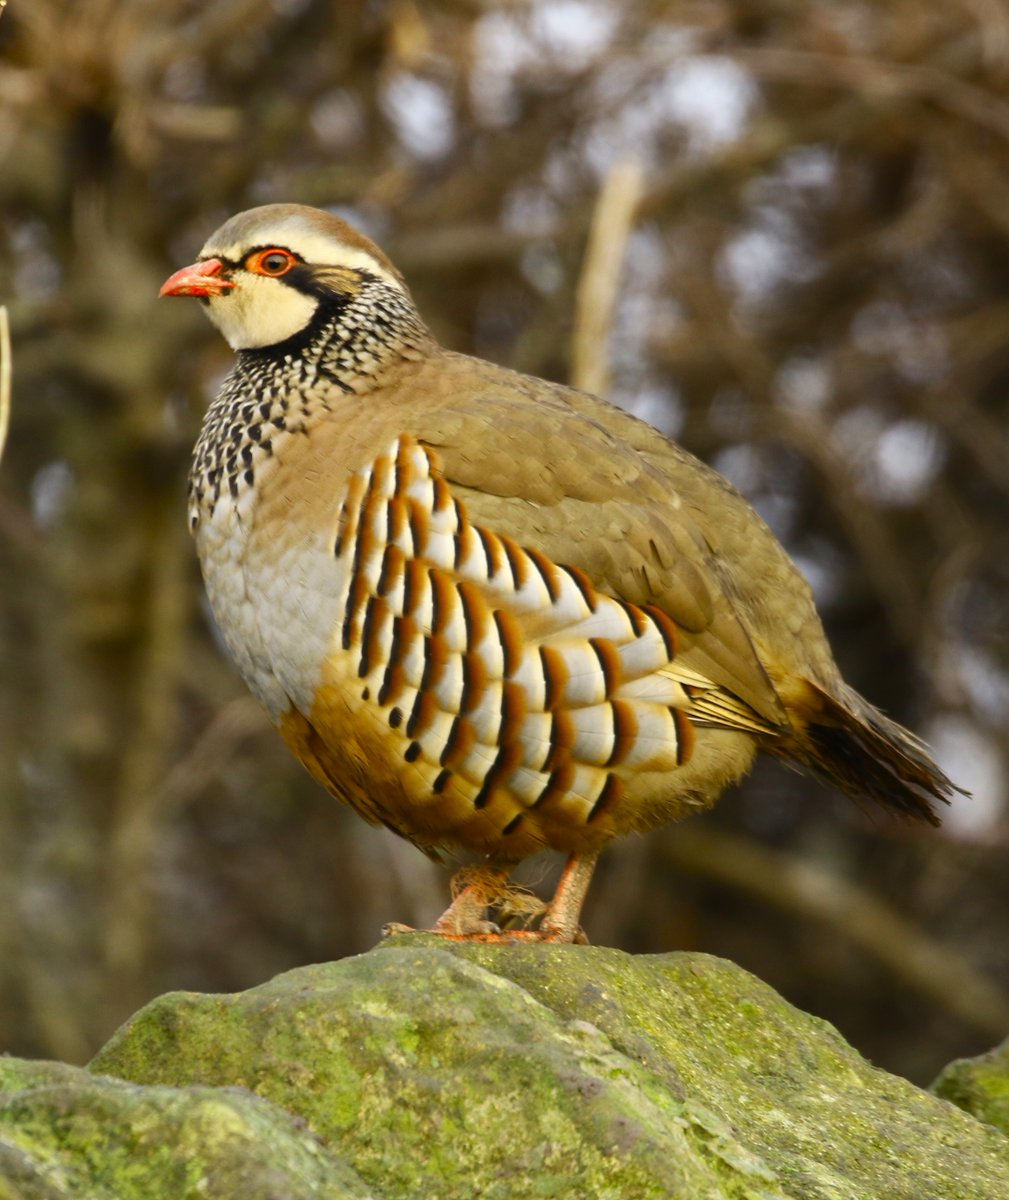 A challenging first half of the week for me, soon made better by one of Northumberland's finest Red-legged Partridges. 🥰 @NTBirdClub